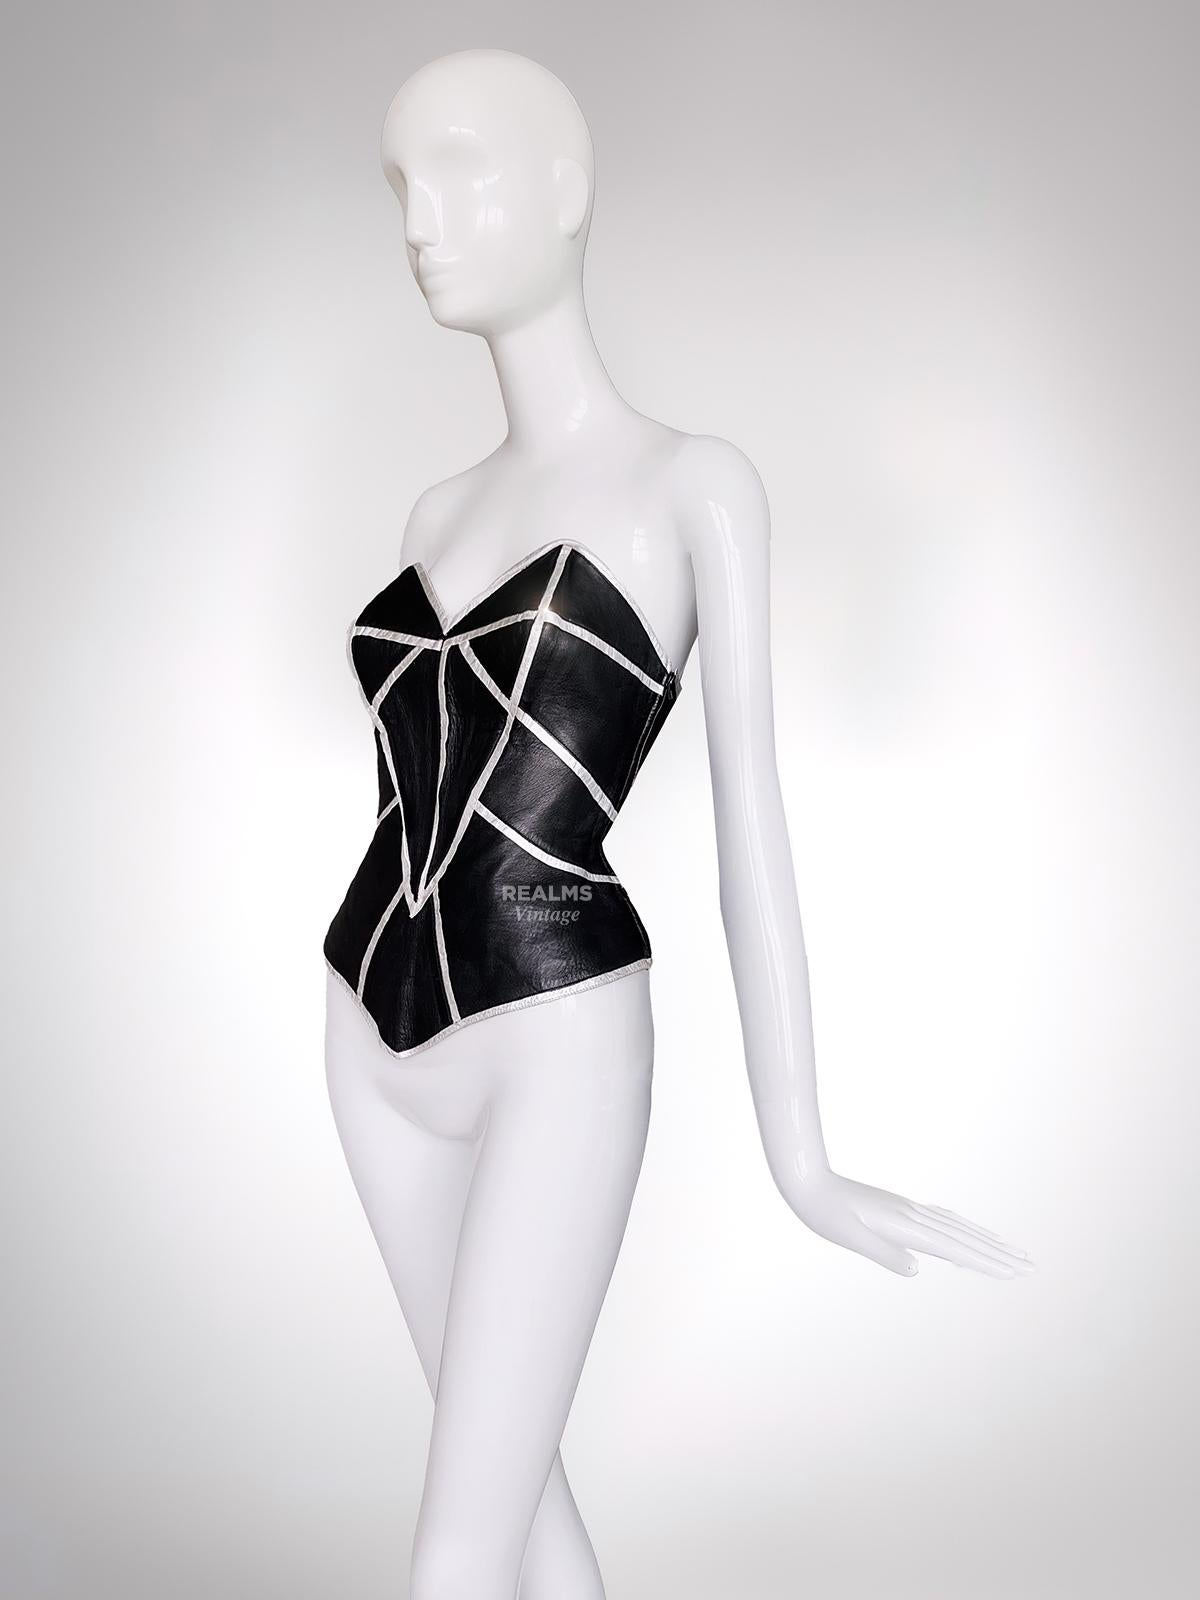 Museum worthy piece of Fashion History

Rare Archival Thierry Mugler Couture Pre-Fall 2001 Les Fauves Collection.
Showstopper!
In the electrifying world of Couture, where artistry meets audacity, few names resonate with the same intensity as Thierry